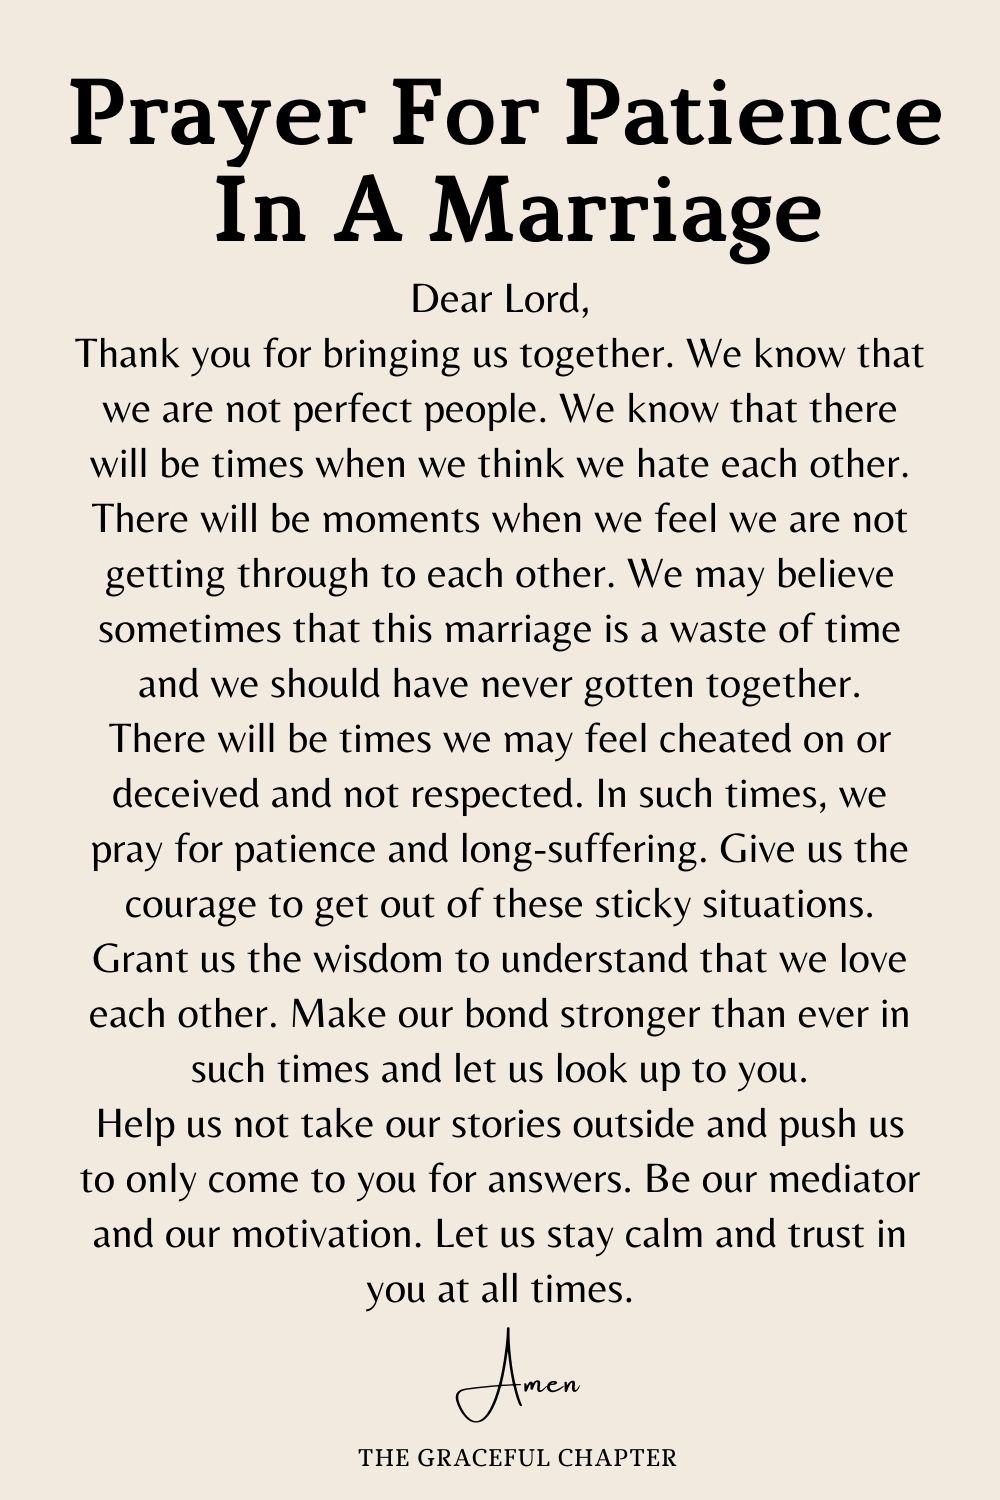 Prayer for Patience in a Marriage